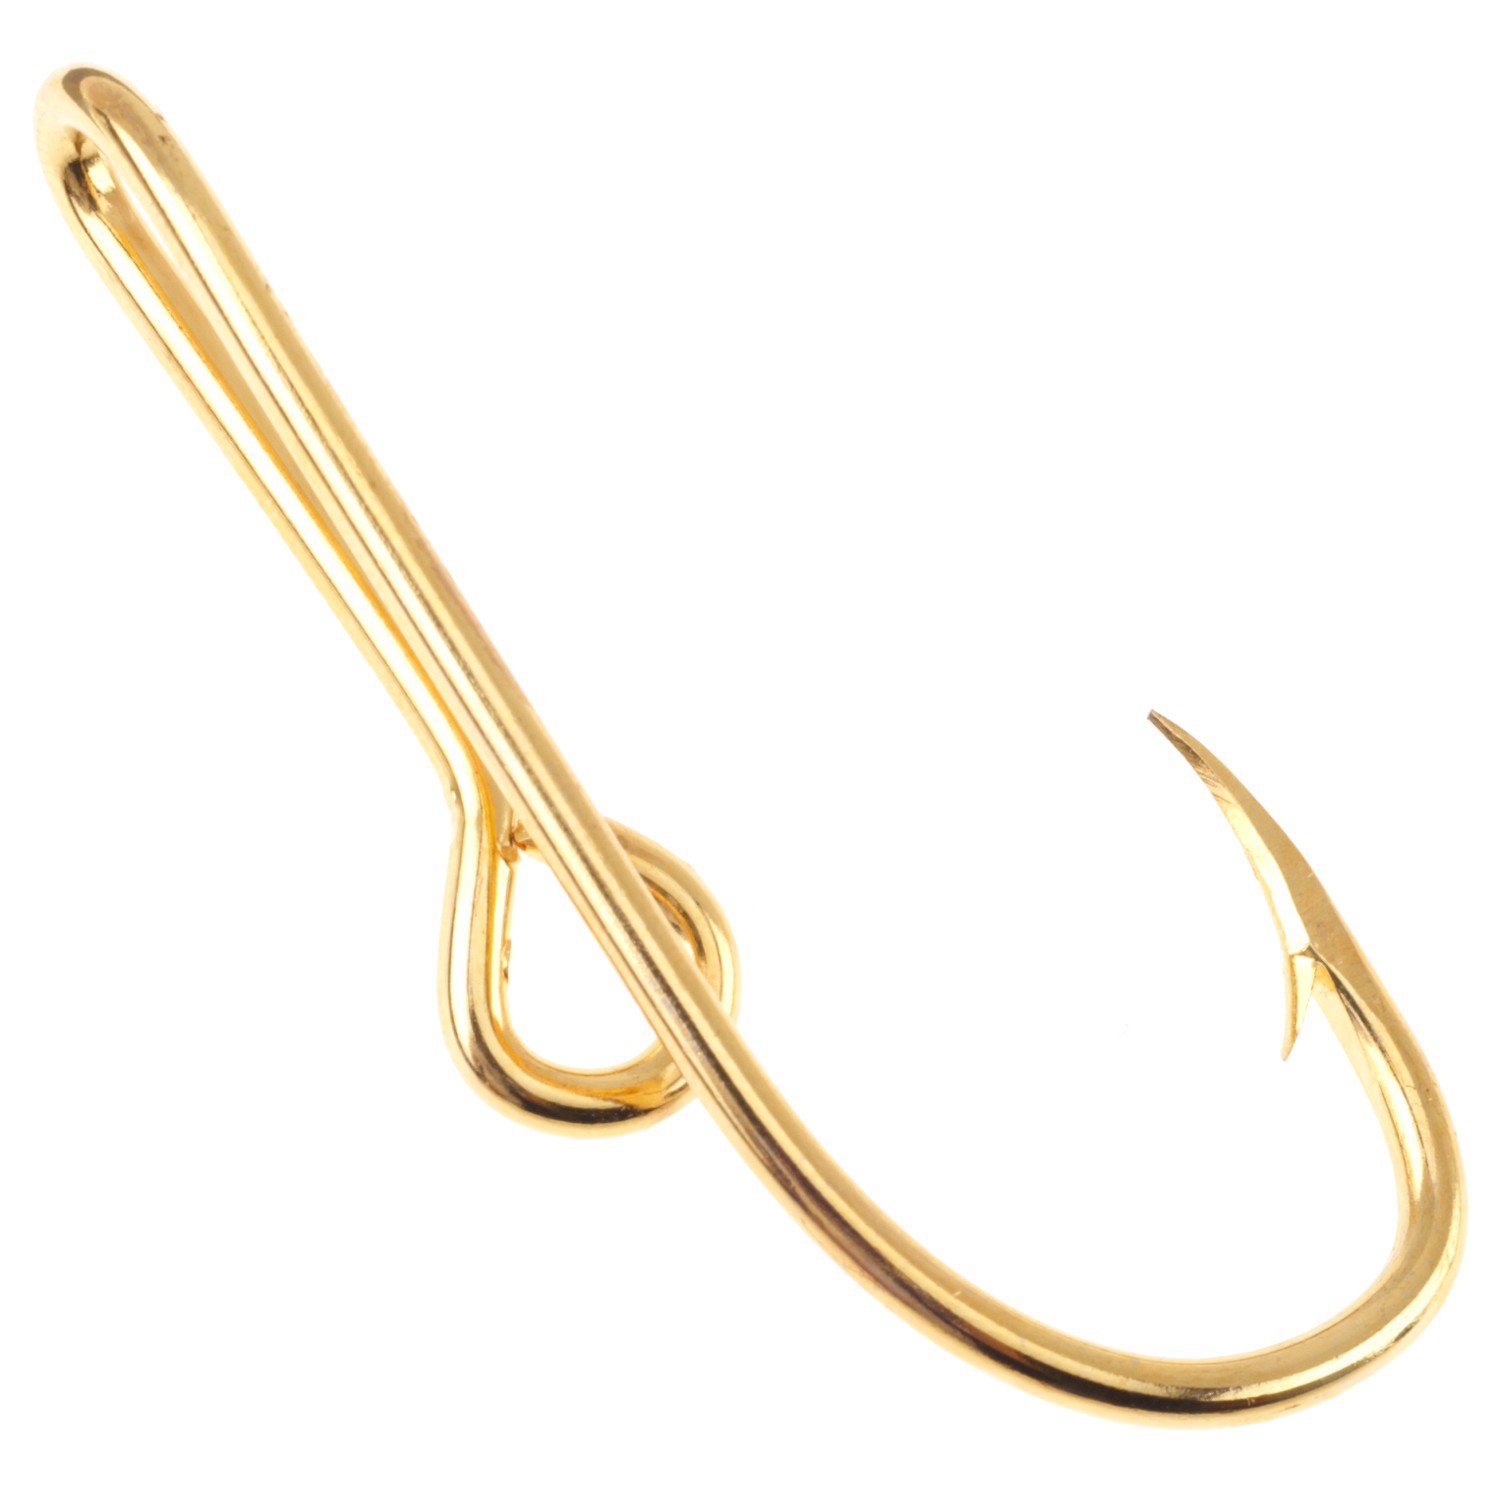 Eagle Claw Fish Hook Hat Pin/ Tie Clasp Hook Gold Plated